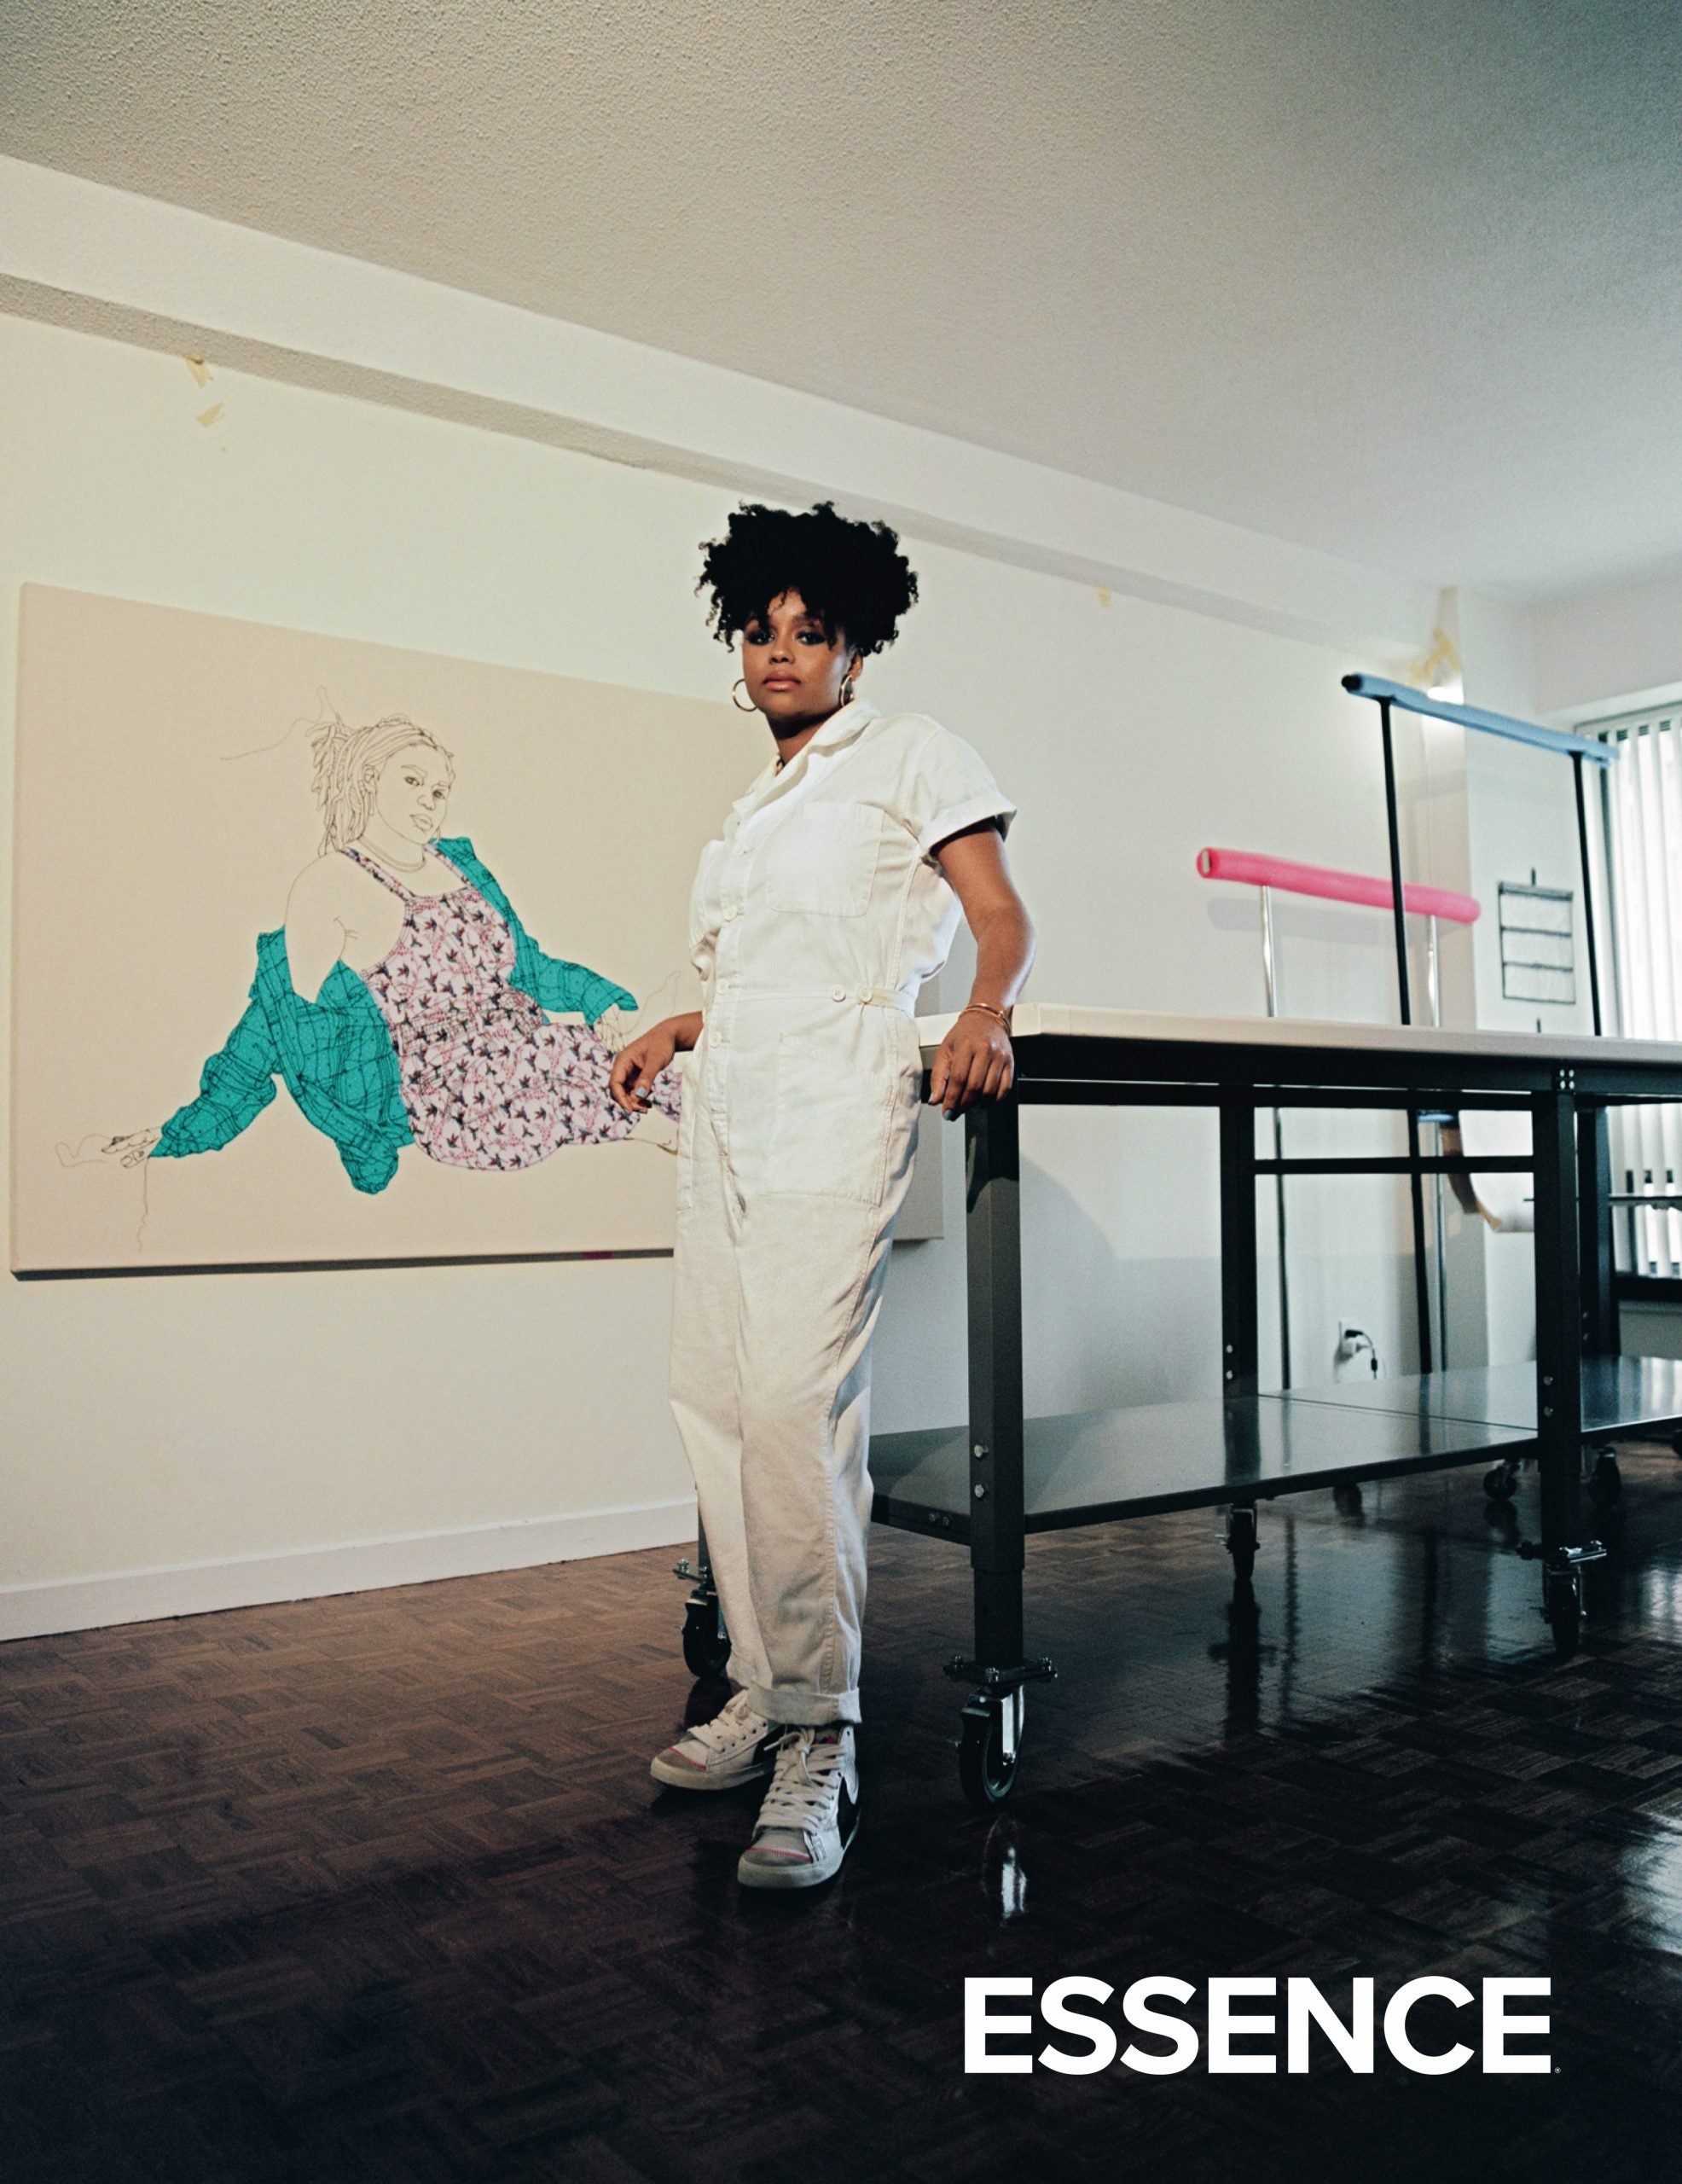 Visual Artist Gio Swaby Wants To Leave A Legacy Of Love Through Her Work